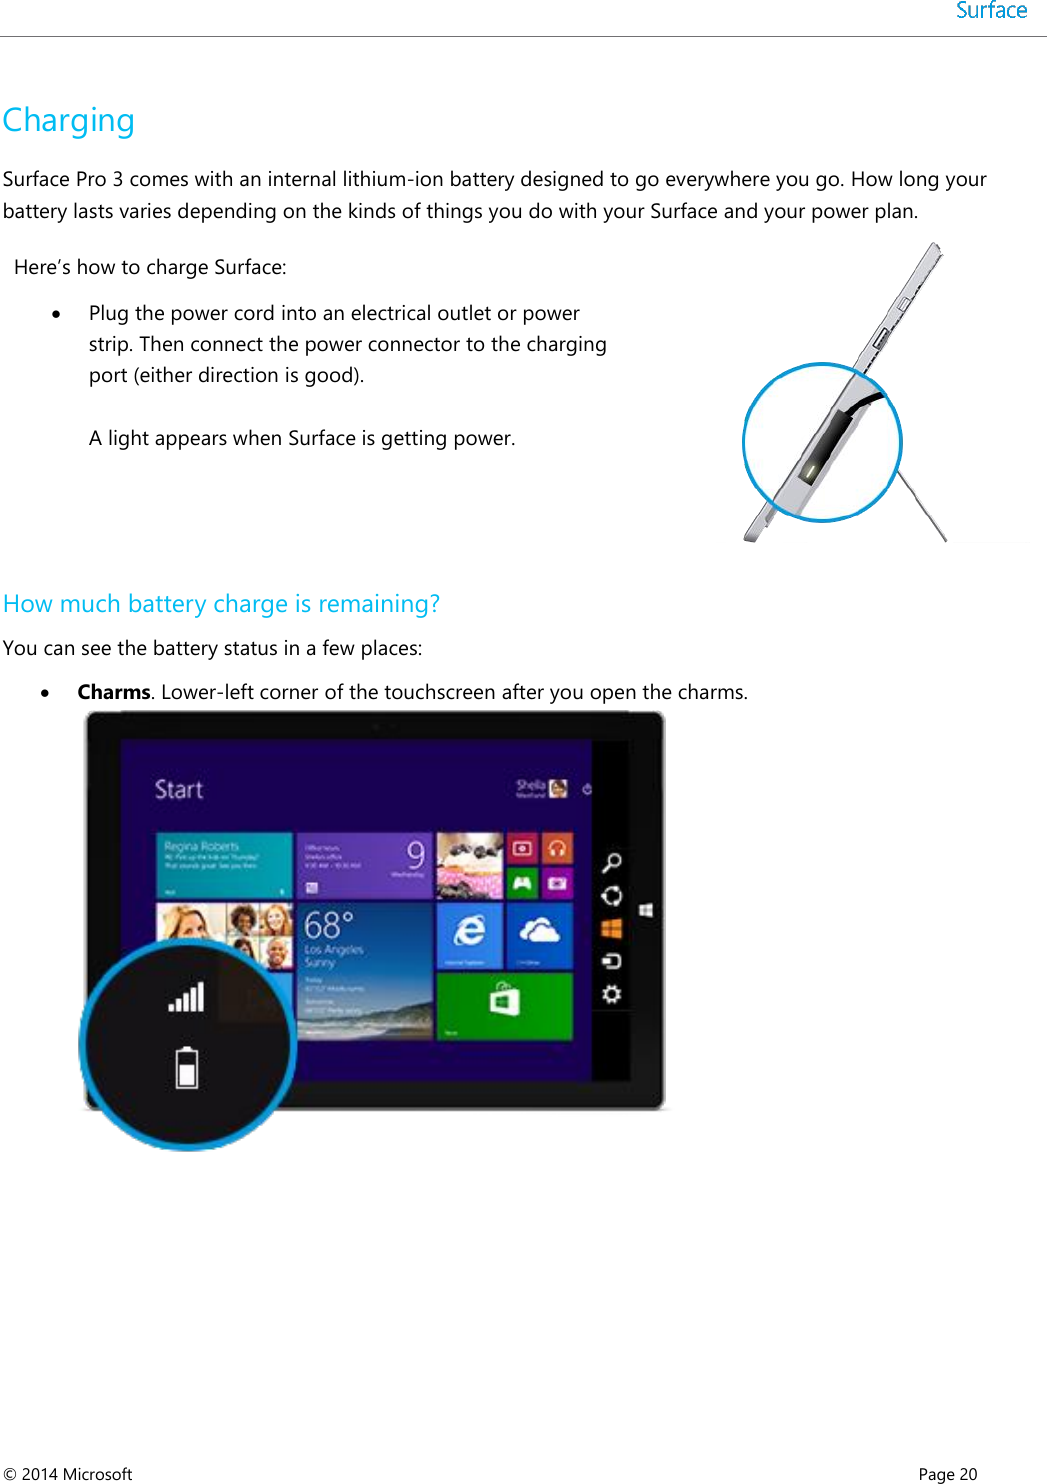  © 2014 Microsoft      Page 20  Charging Surface Pro 3 comes with an internal lithium-ion battery designed to go everywhere you go. How long your battery lasts varies depending on the kinds of things you do with your Surface and your power plan.  Here’s how to charge Surface:  Plug the power cord into an electrical outlet or power strip. Then connect the power connector to the charging port (either direction is good).   A light appears when Surface is getting power.   How much battery charge is remaining? You can see the battery status in a few places:   Charms. Lower-left corner of the touchscreen after you open the charms.     